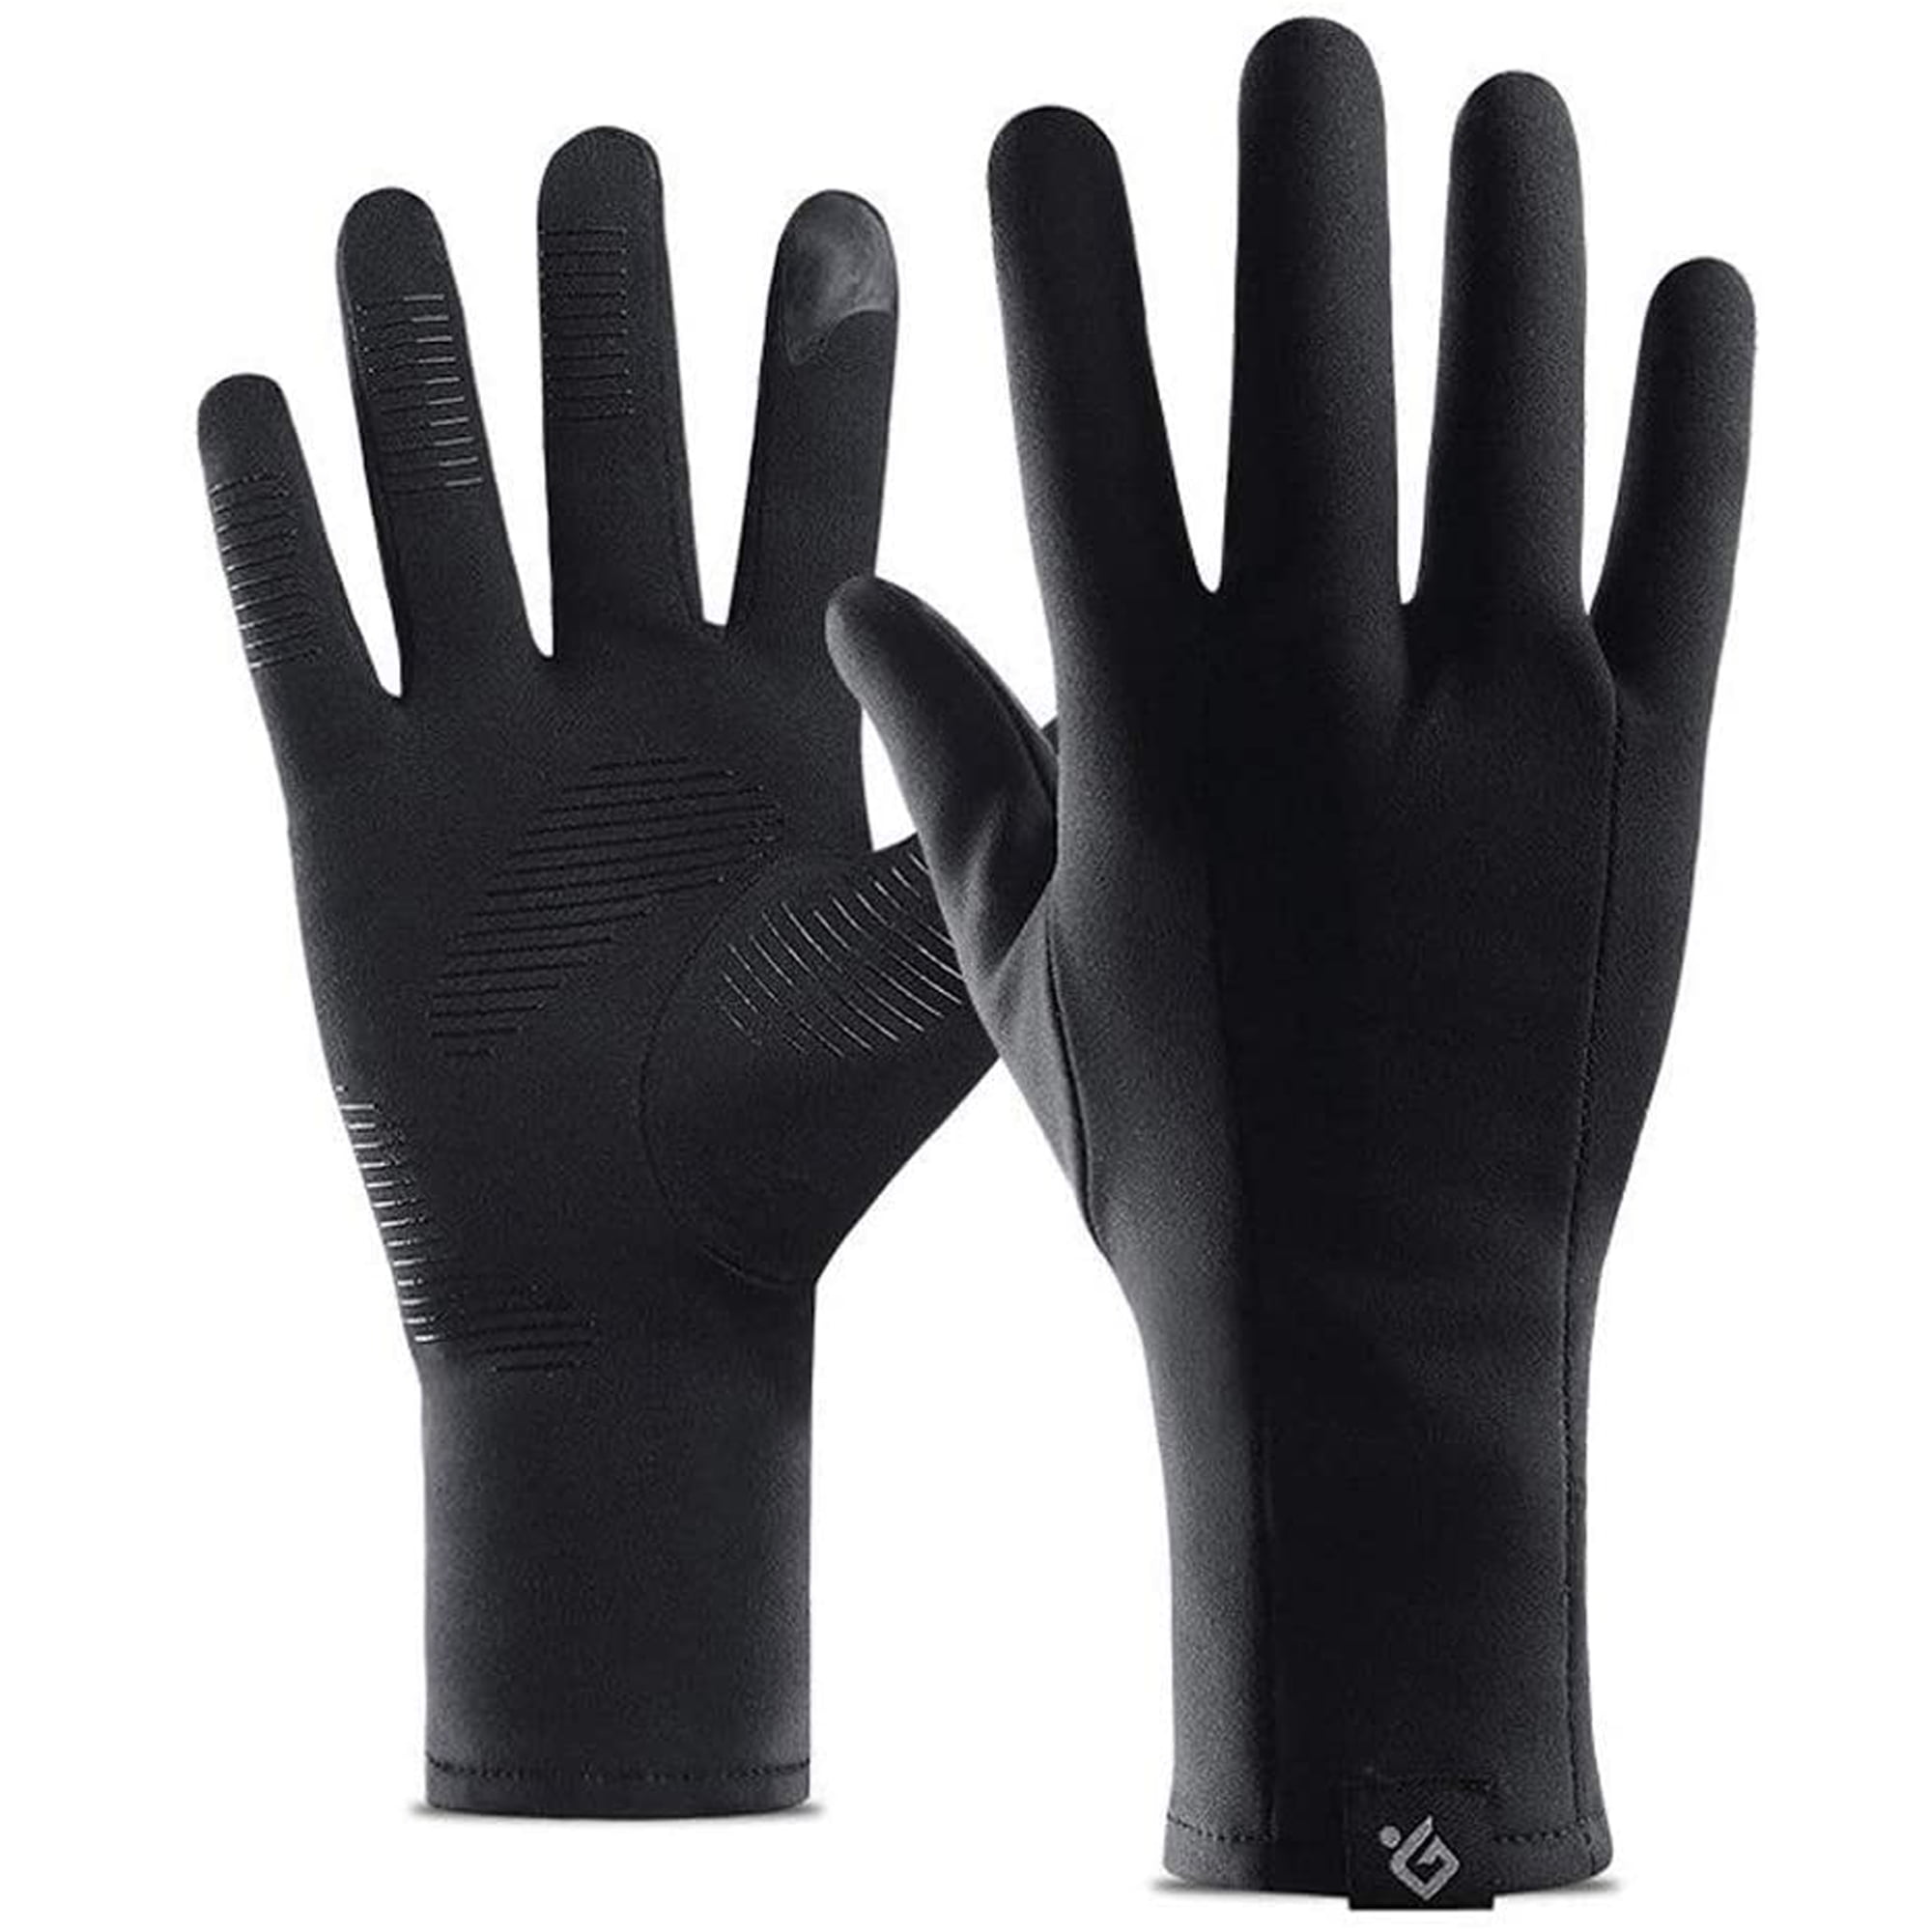 Men/Women Insulated Gloves Outdoor Winter Warm Thermal Riding Skiing Waterproof 